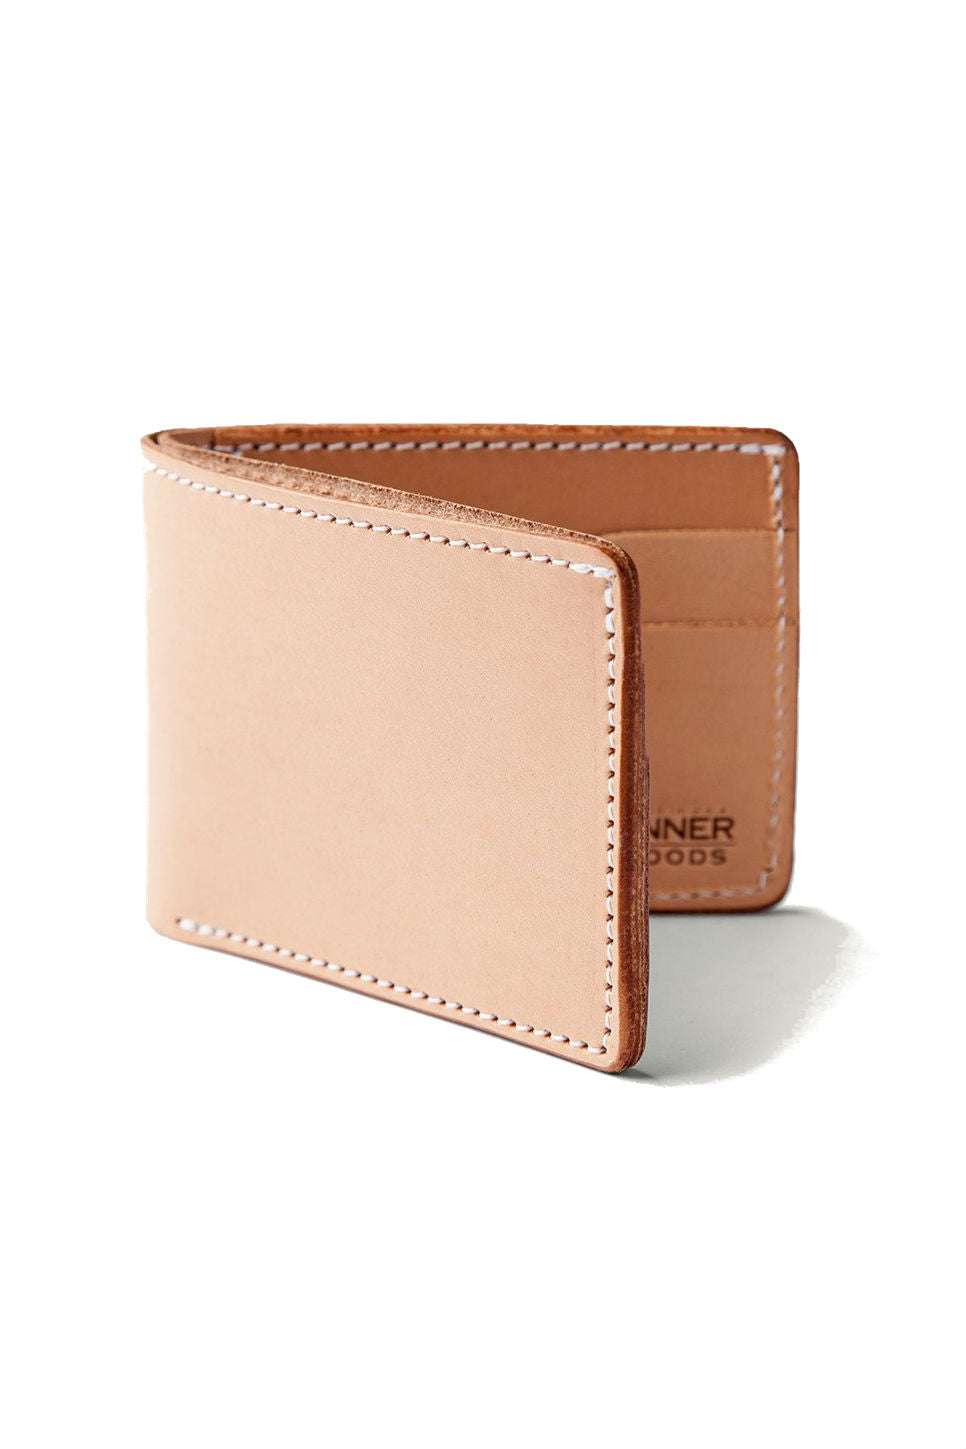 Tanner Goods - Utility Bifold - Natural